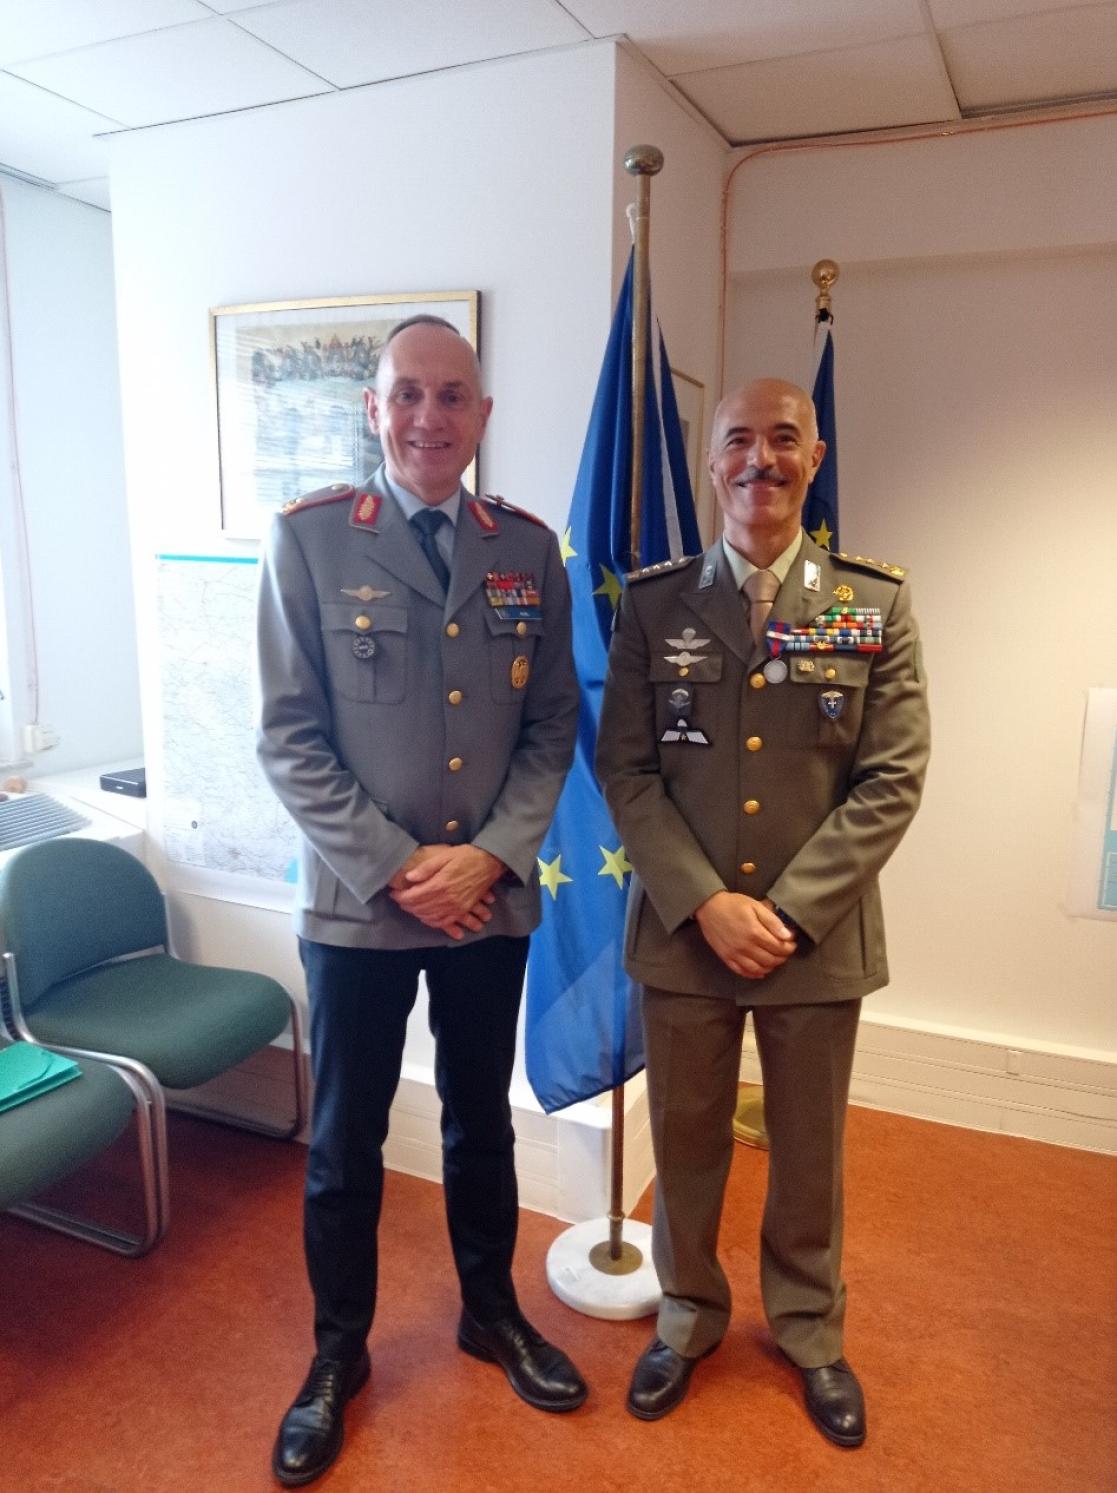 Two men in military uniform pose in front of an EU flag